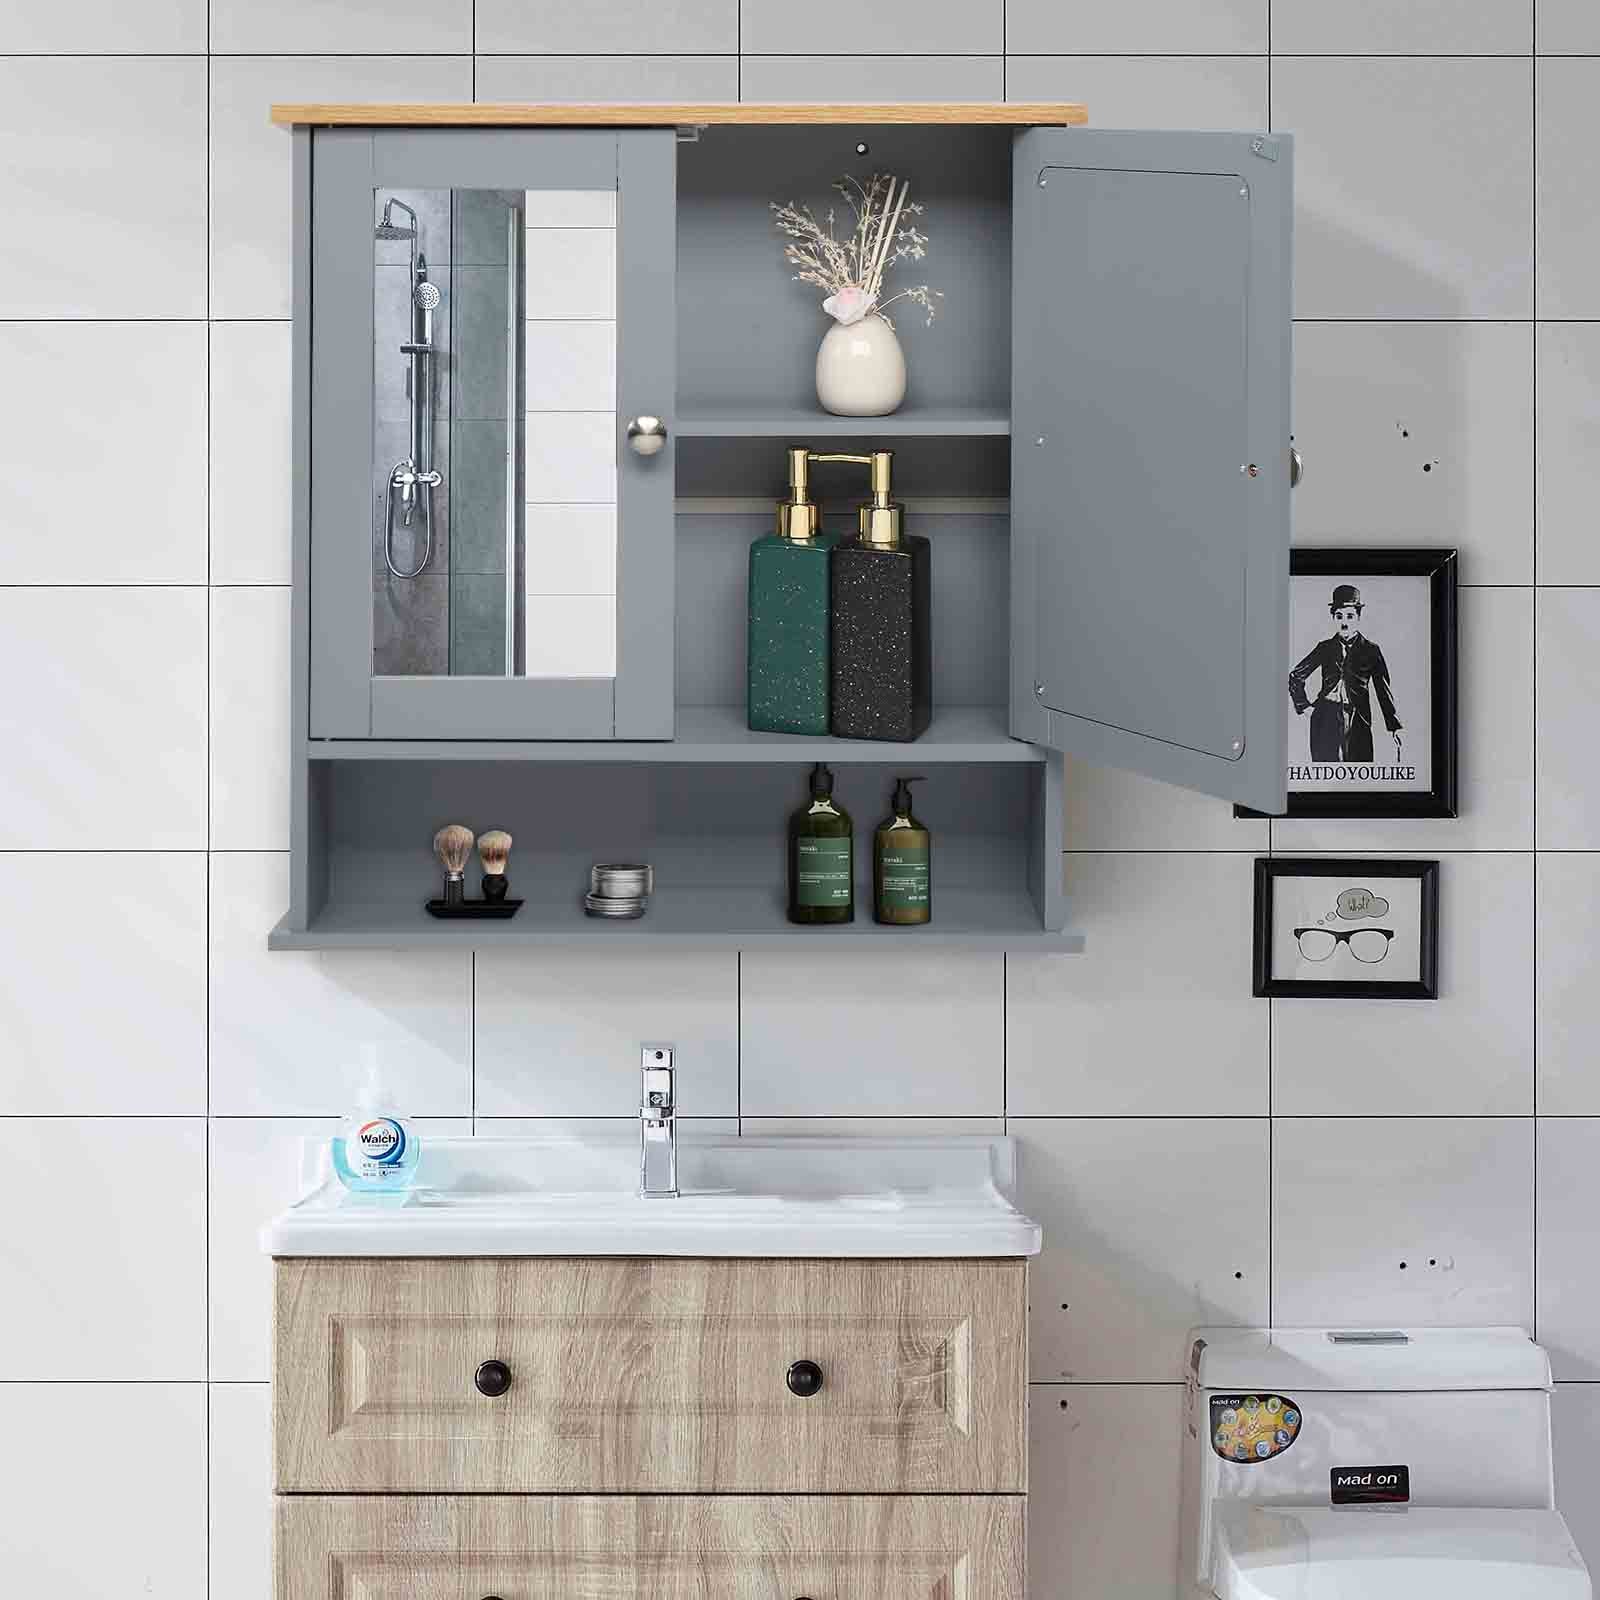 Anchorage Mirrored Wall Cabinet